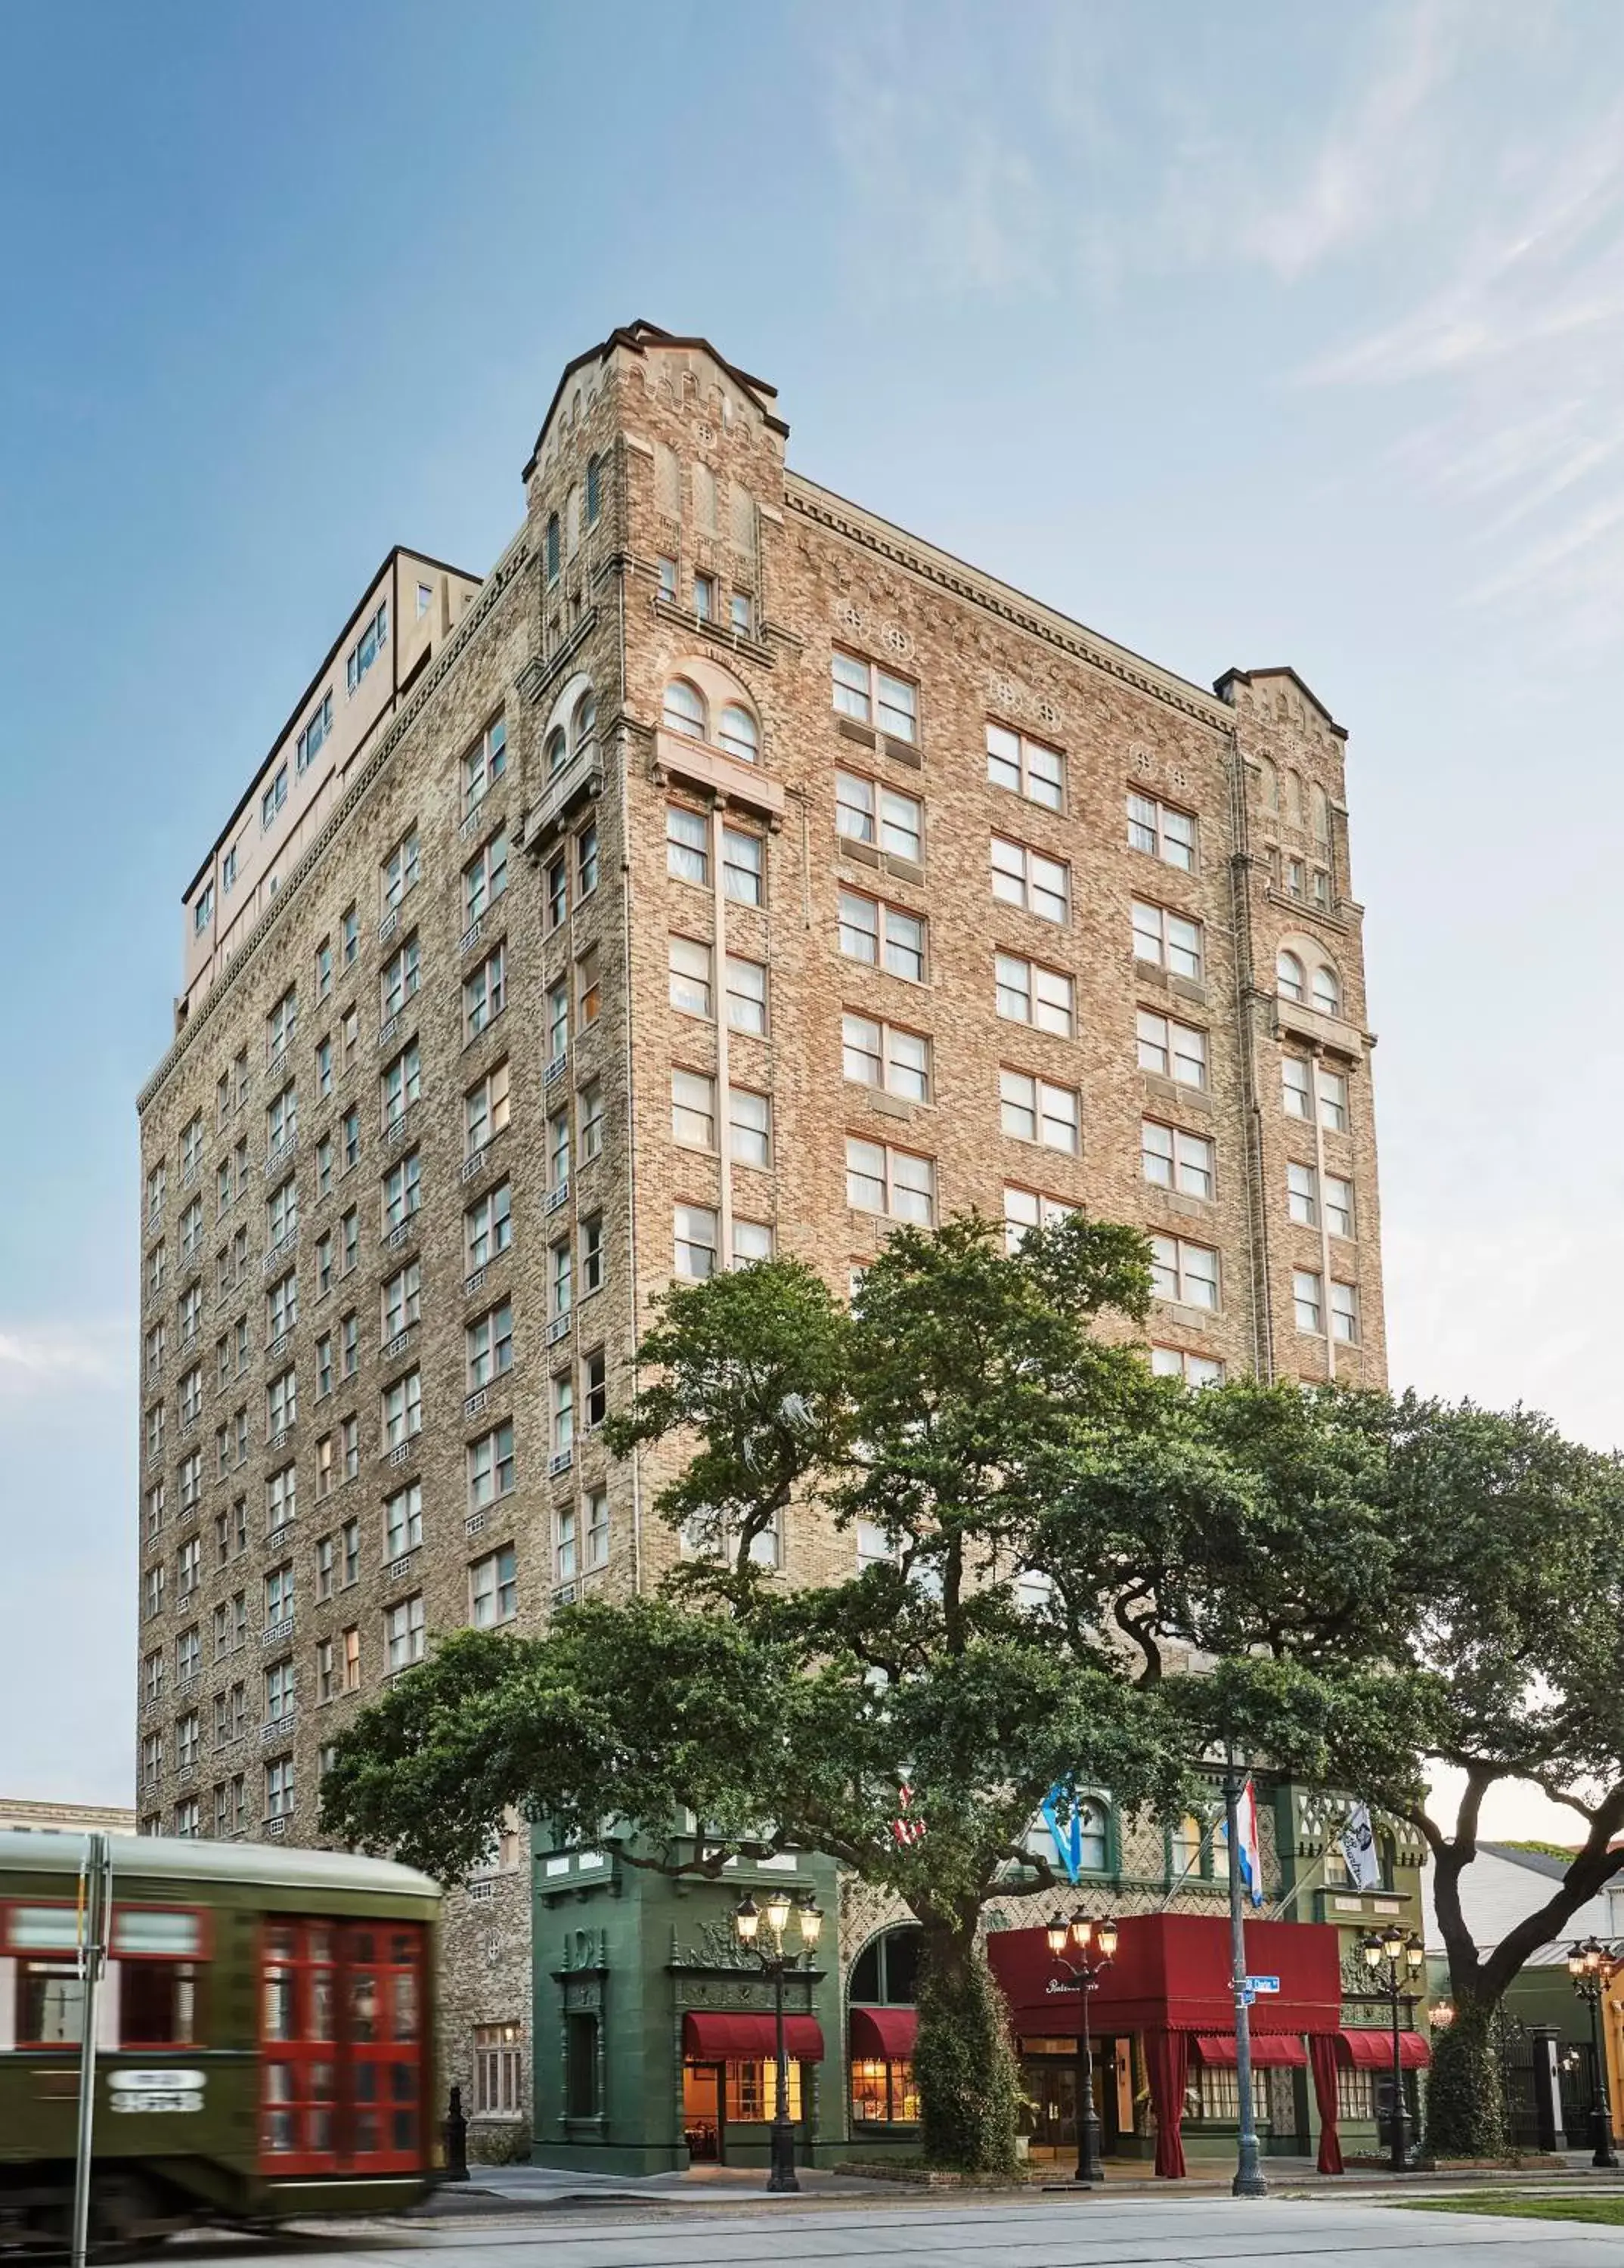 Nearby landmark, Property Building in Pontchartrain Hotel St. Charles Avenue